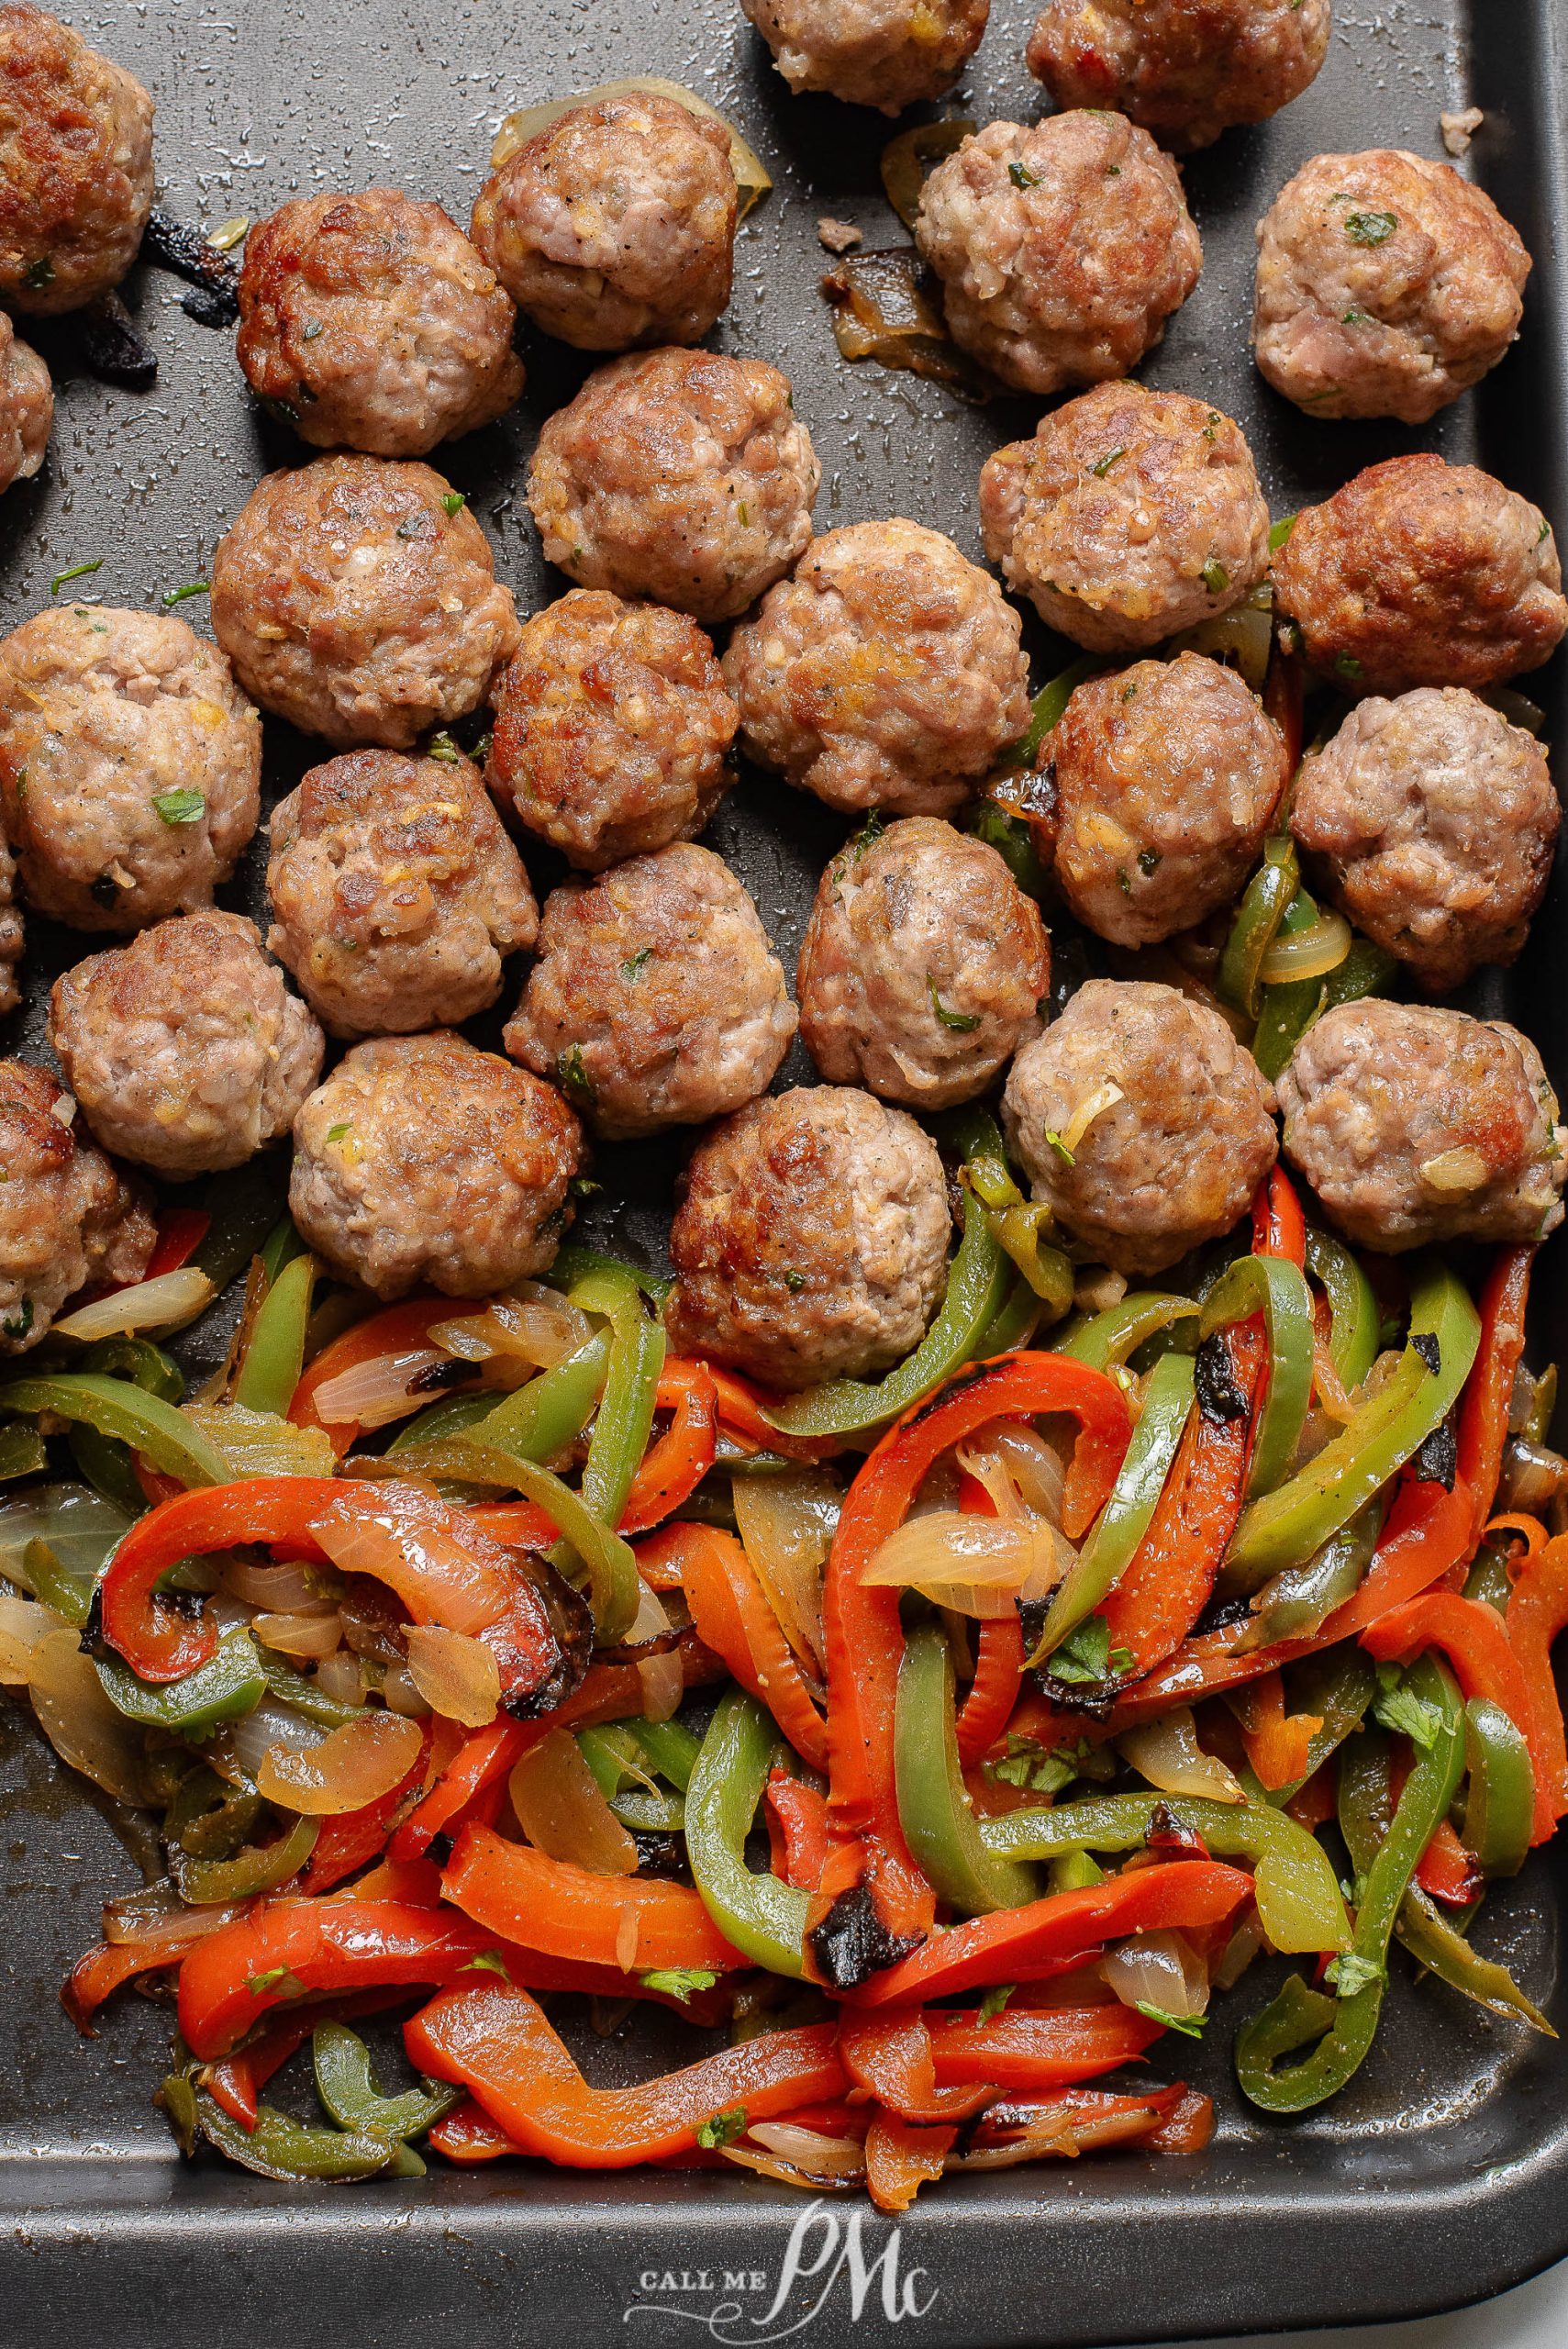 Meatballs and peppers on a baking sheet.